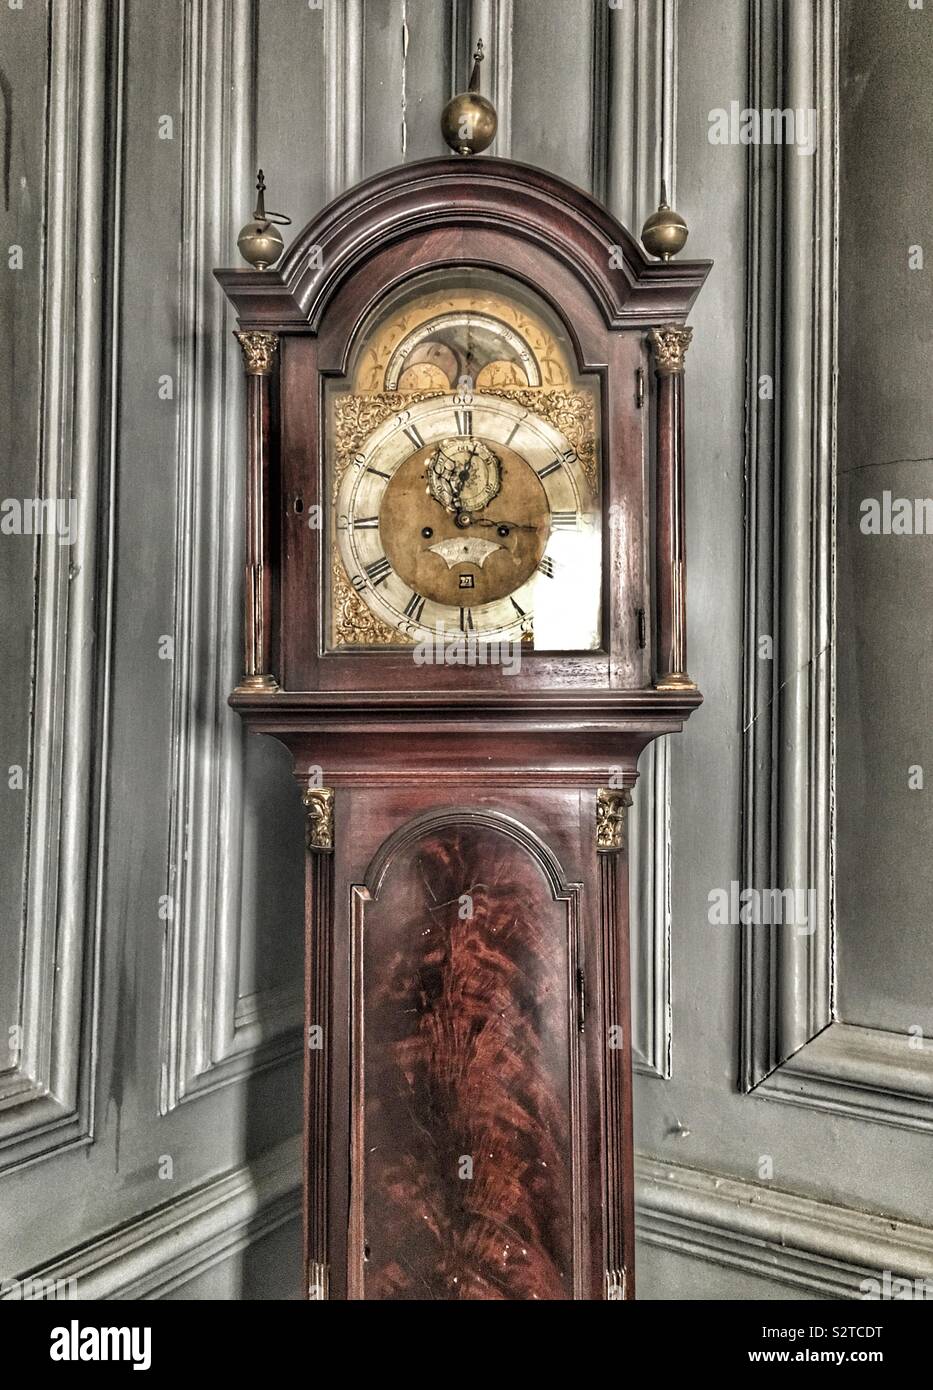 Old grandfather clock Stock Photo